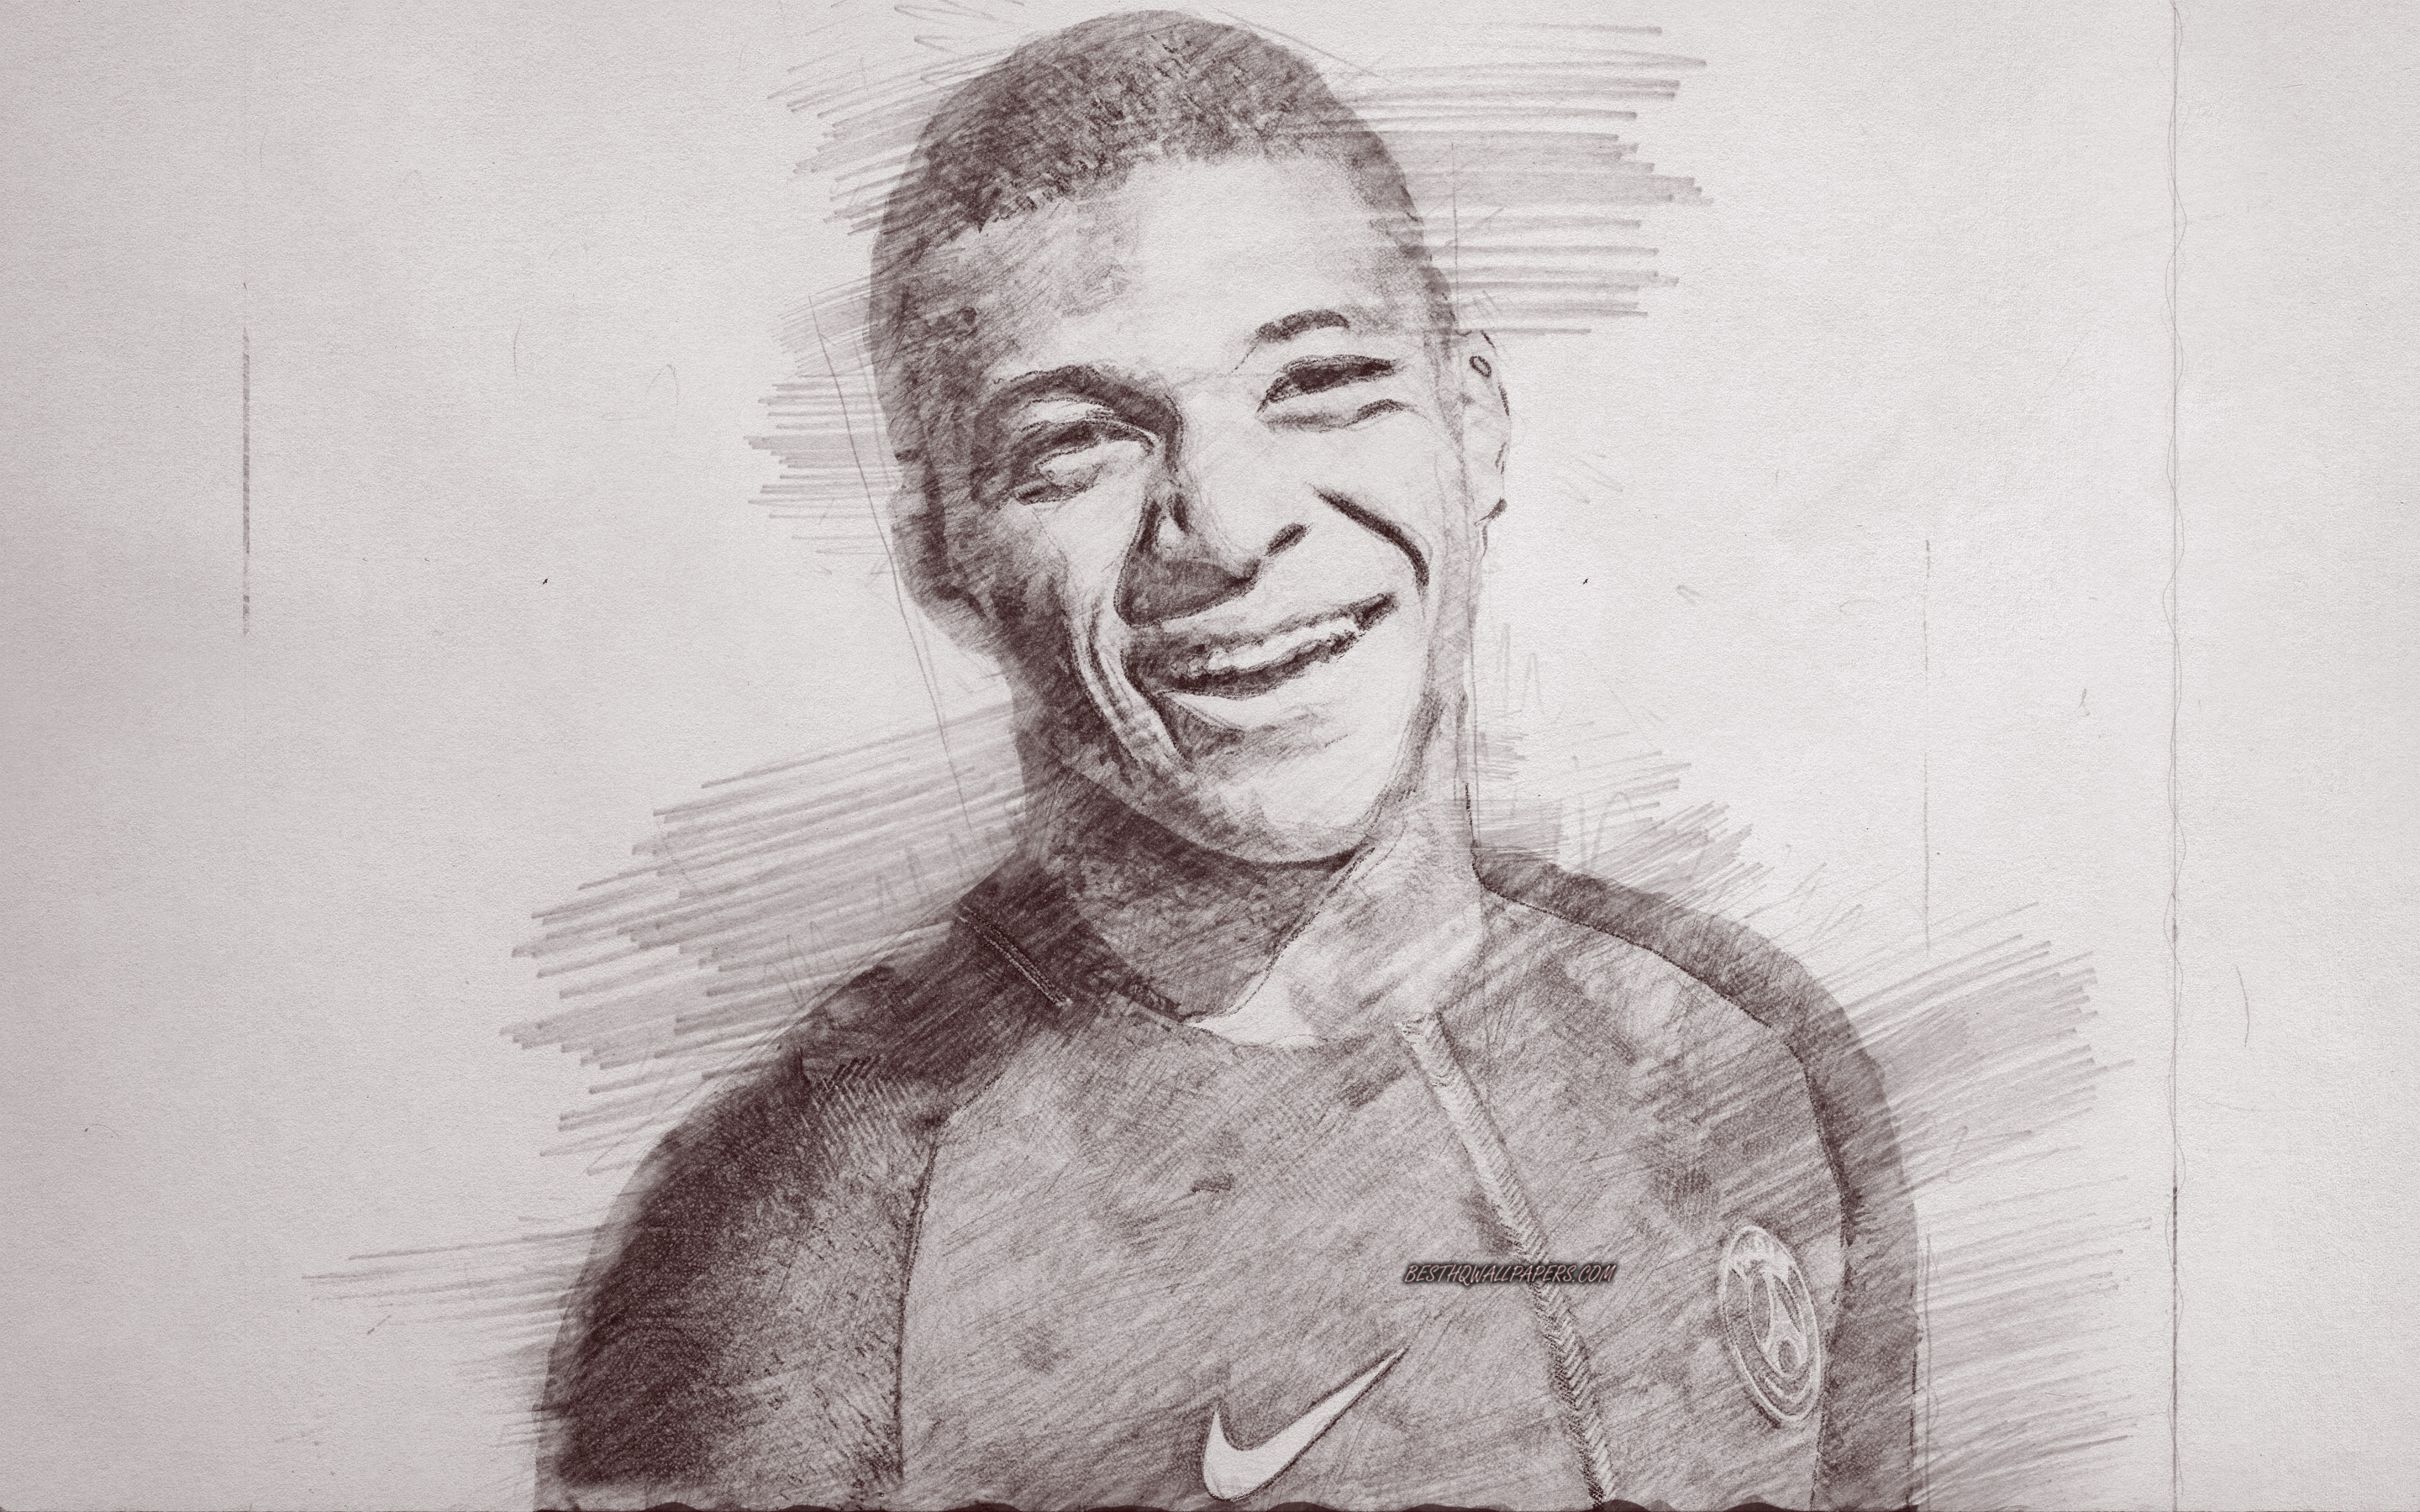 Download Wallpaper Kylian Mbappe, Portrait, PSG, Pencil Drawing Portrait, French Football Player, Paris Saint Germain, France, Ligue Football For Desktop With Resolution 2880x1800. High Quality HD Picture Wallpaper